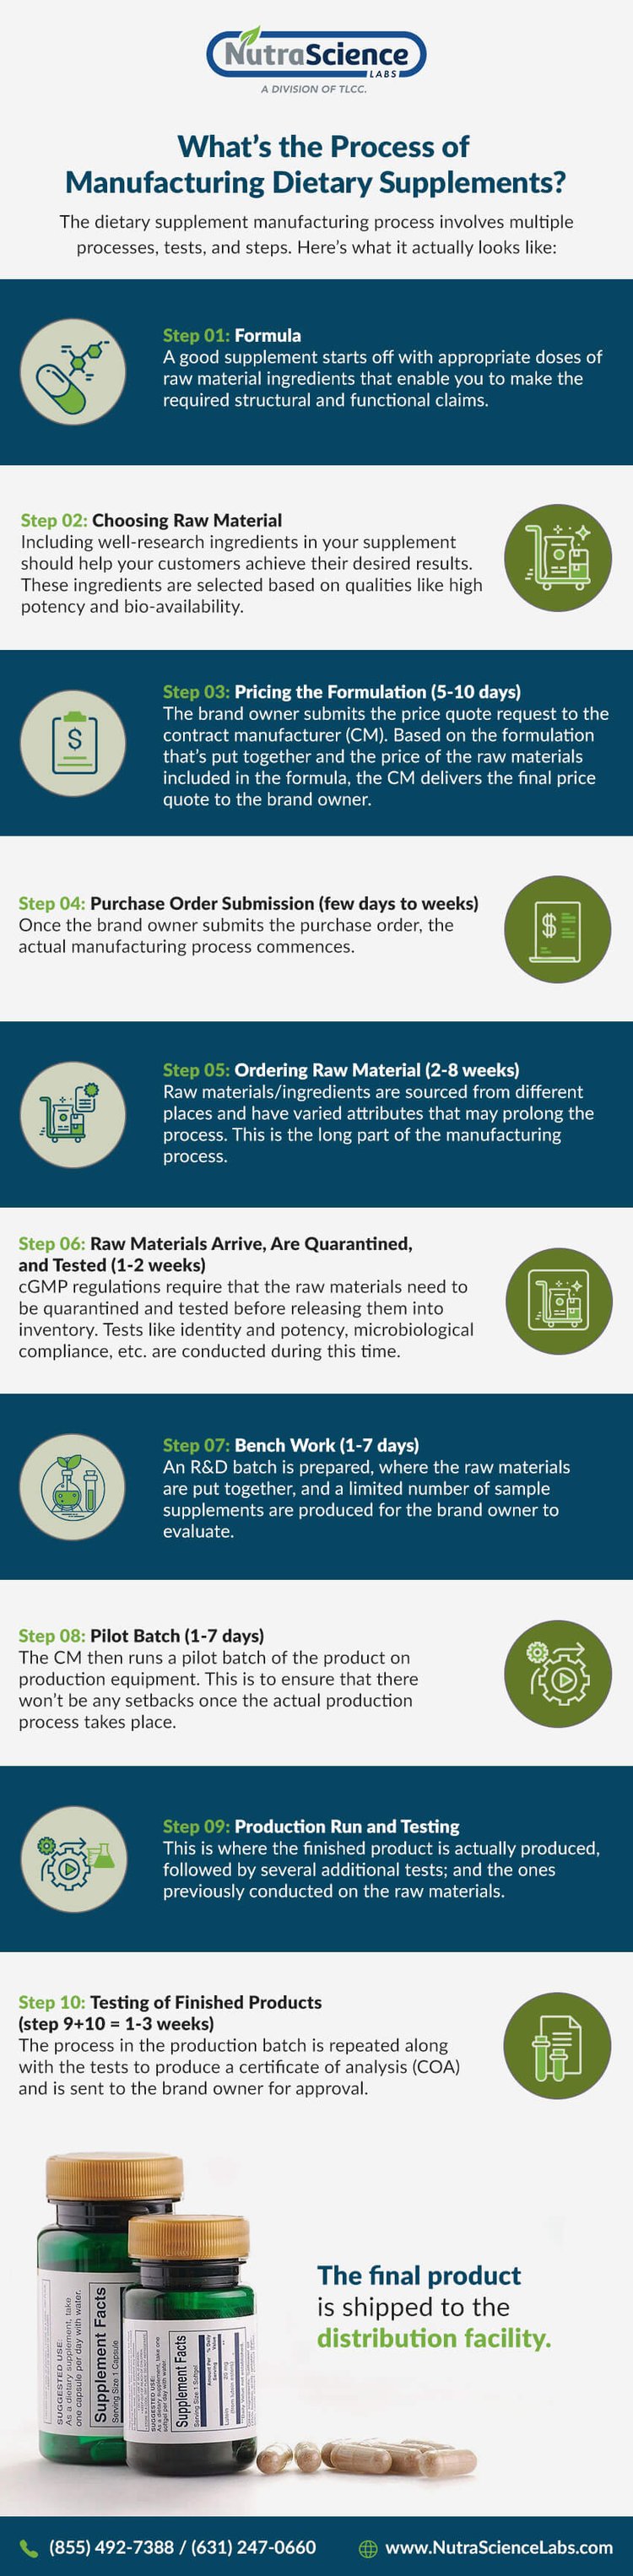 What's The Process of Manufacturing Dietary Supplements - Infographic